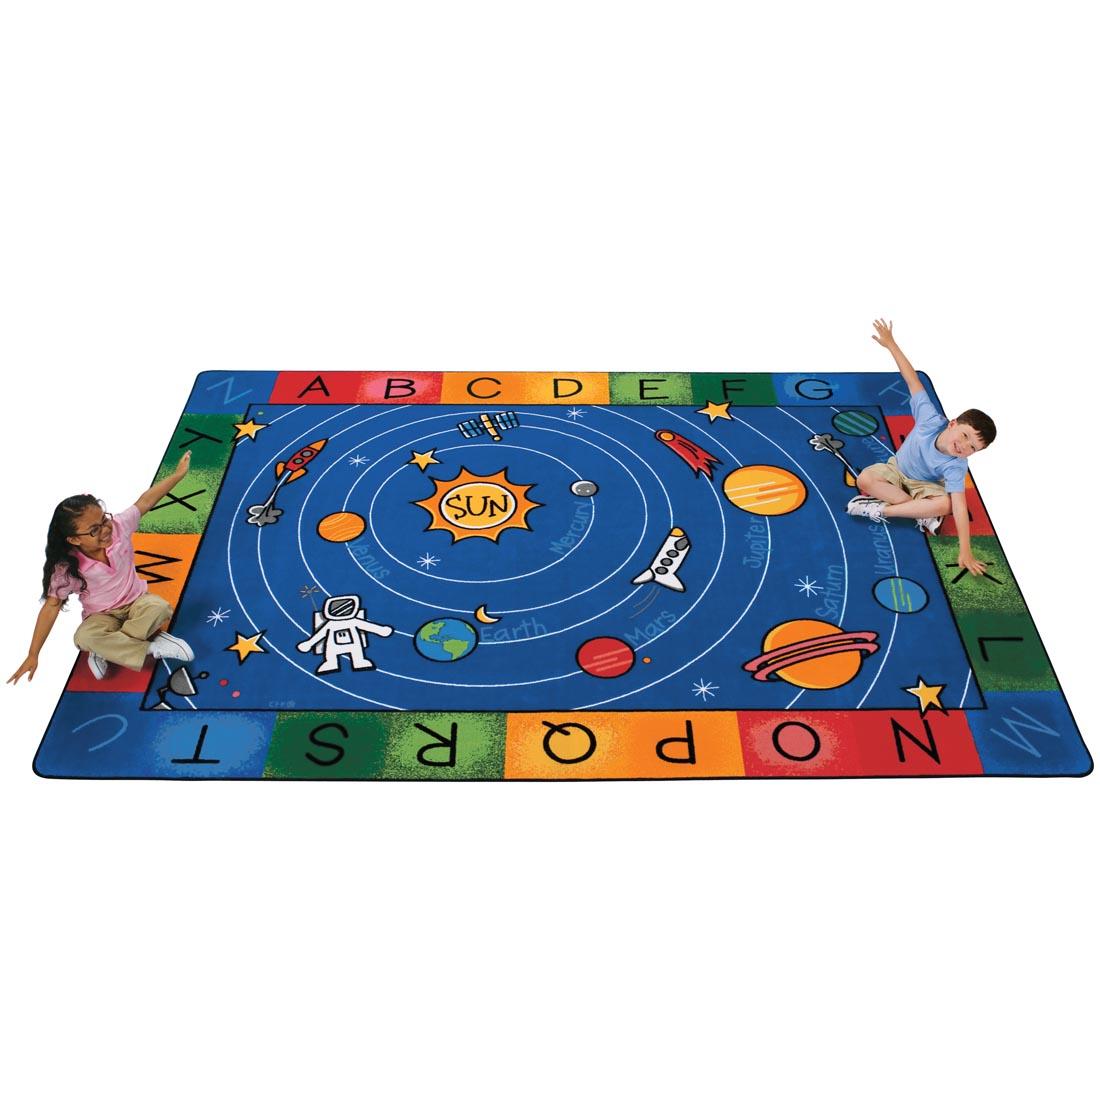 Children sitting on the Outer Space-themed Alphabet Rug by Carpets For Kids